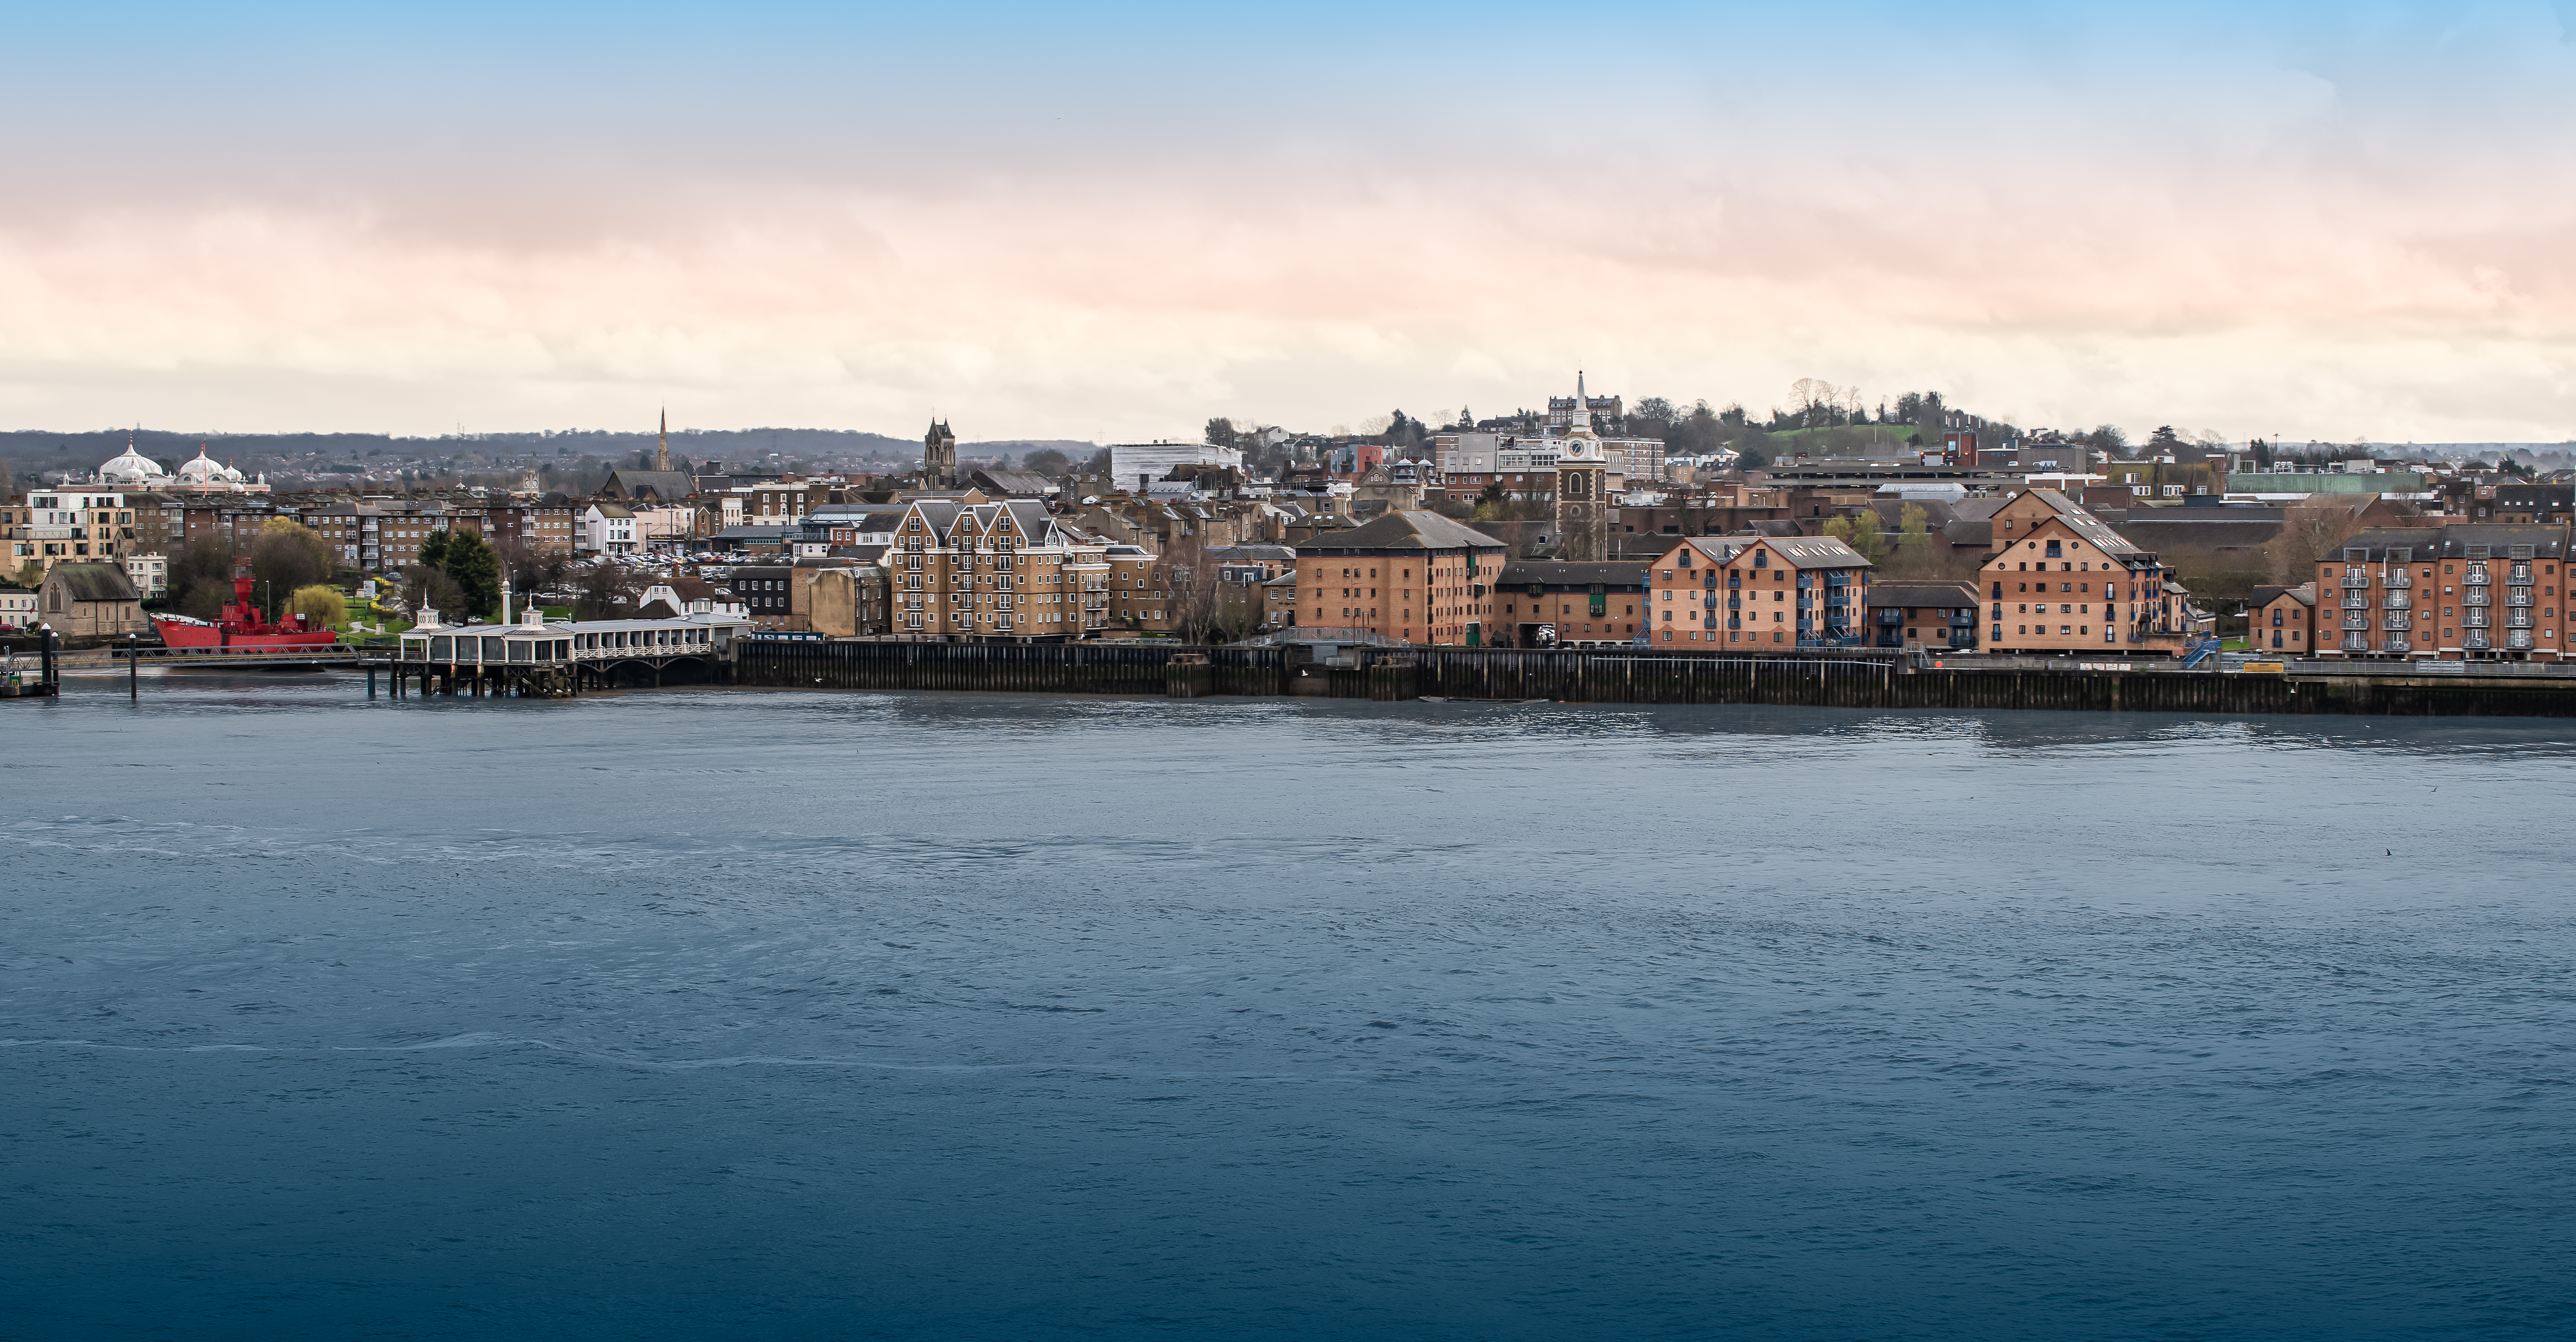 Panoramic view of Gravesend and the Thames river, England, UK